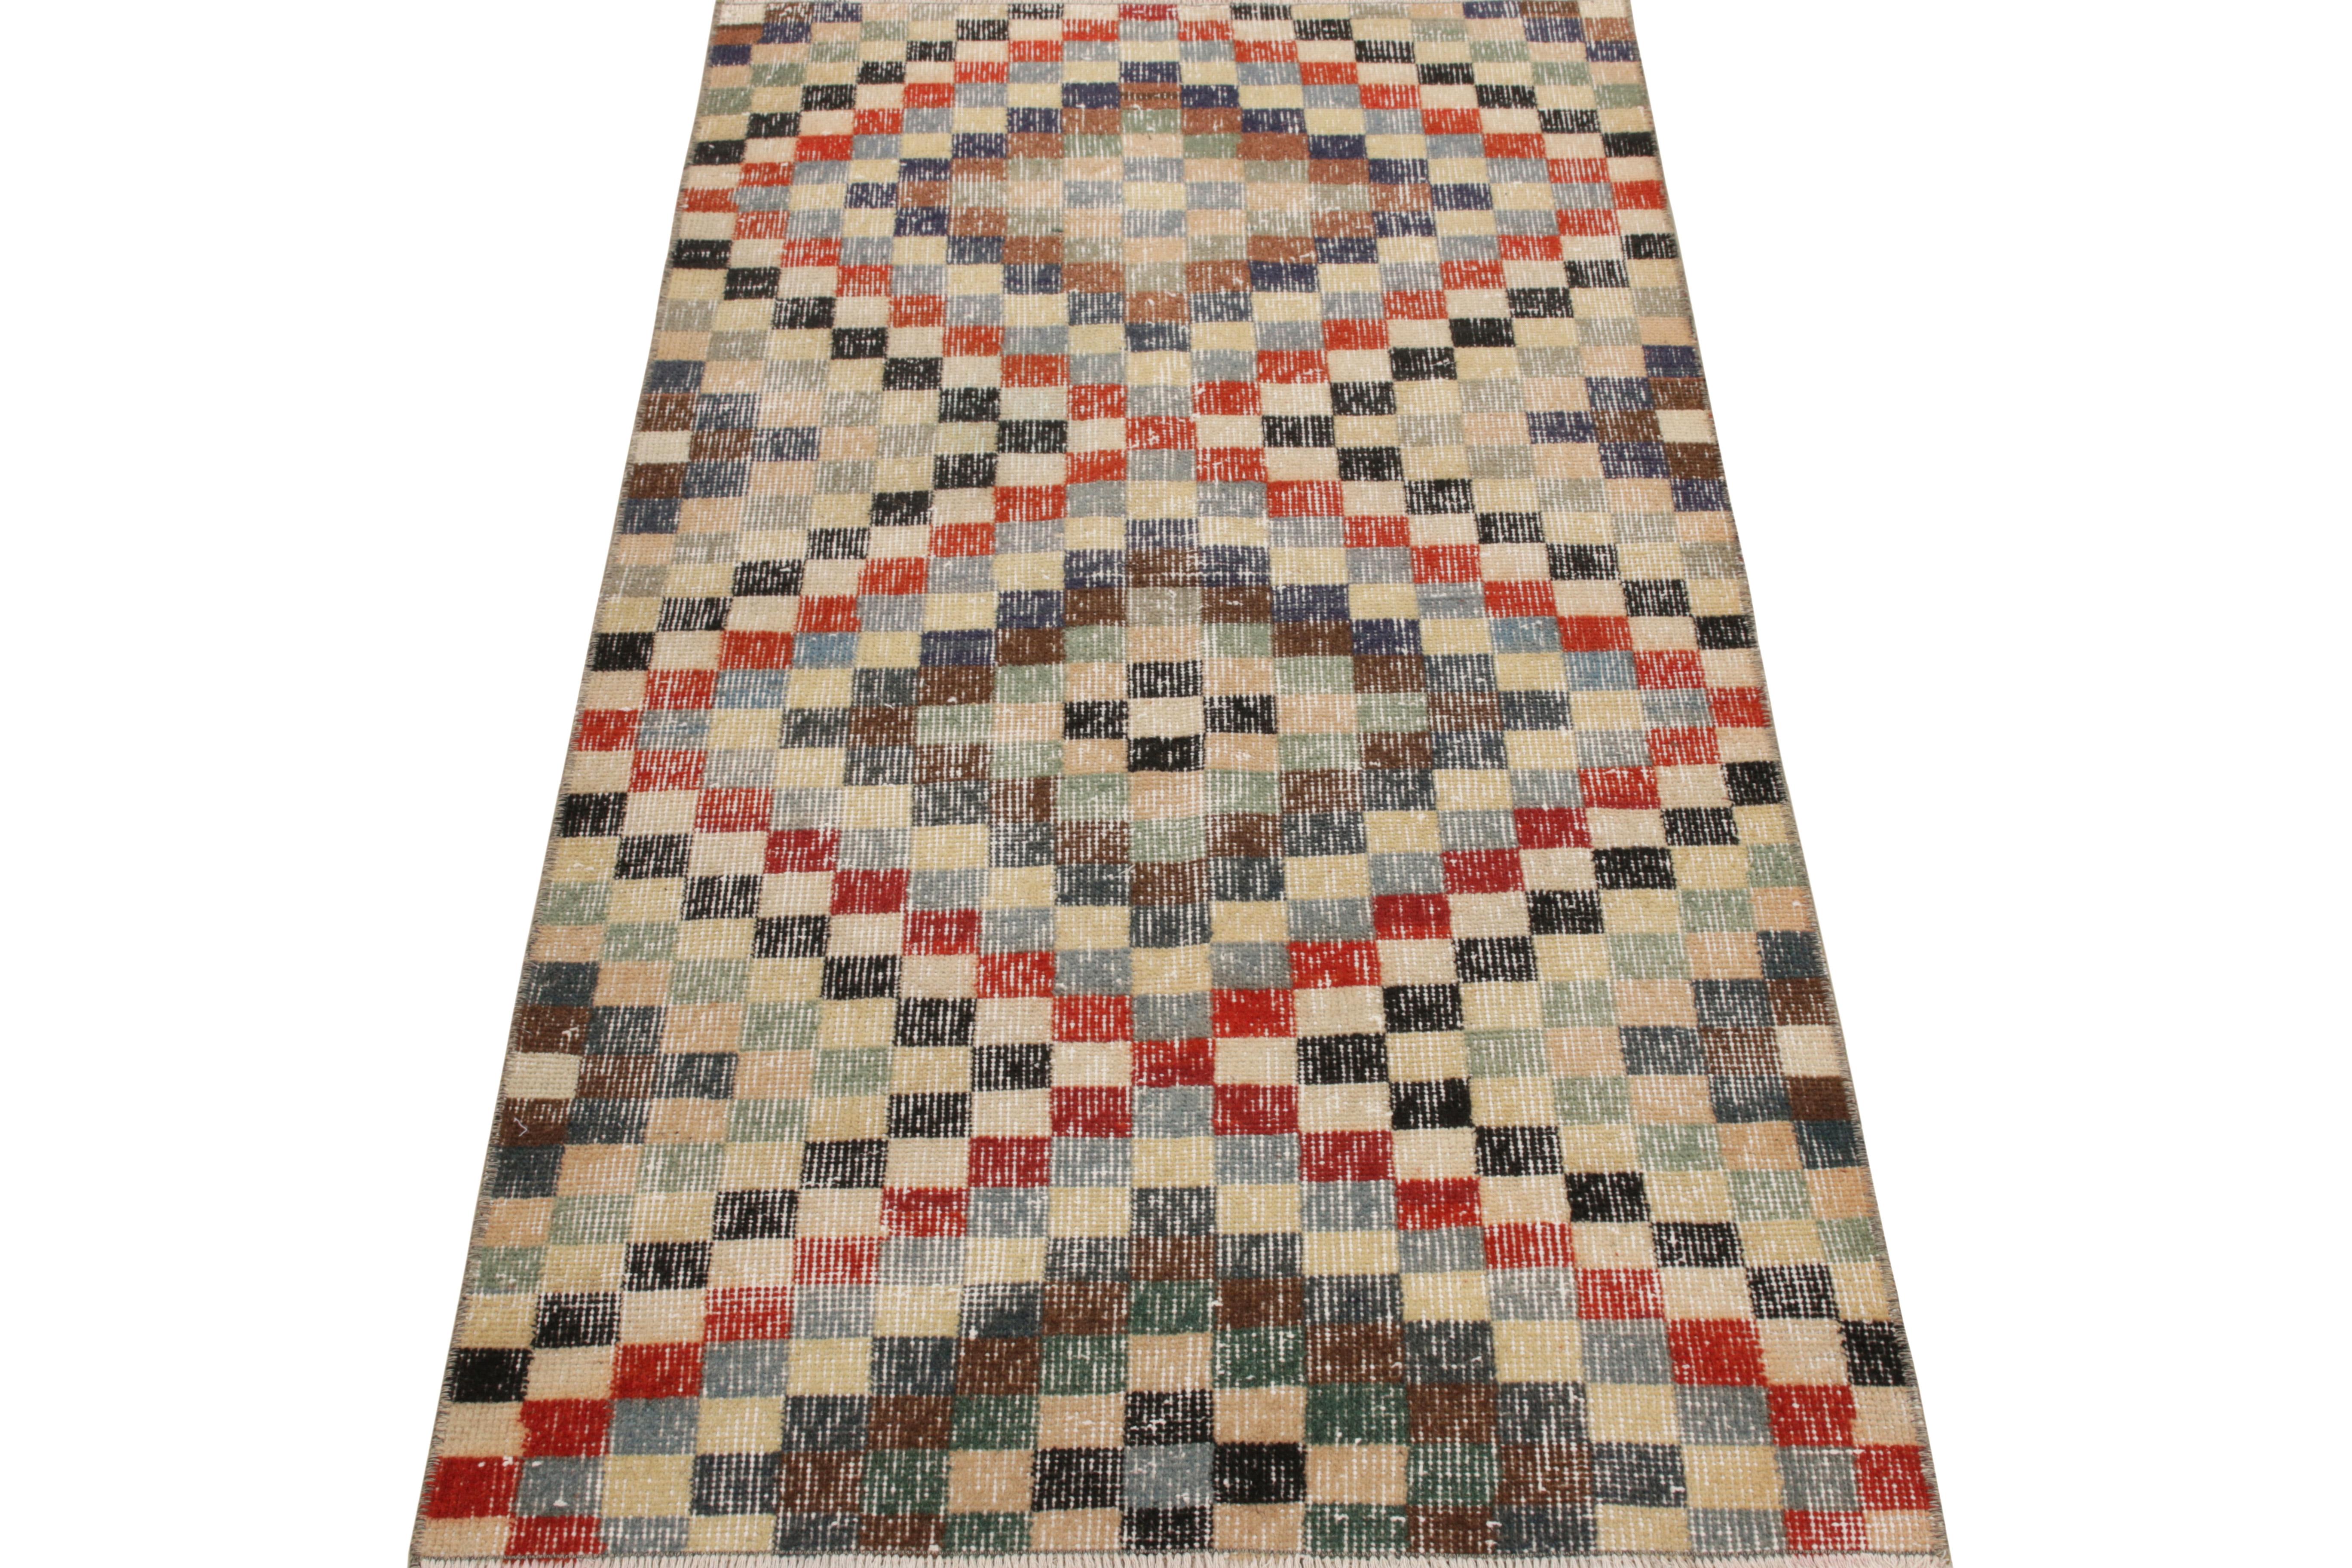 From a venerated Turkish designer, a 3 x 5 vintage rug of the 1960s—now joining our Mid Century Pasha collection. The shabby chic drawing enjoys a graceful multicolor geometric pattern for exceptional pagination in such warm-cool colorplay.